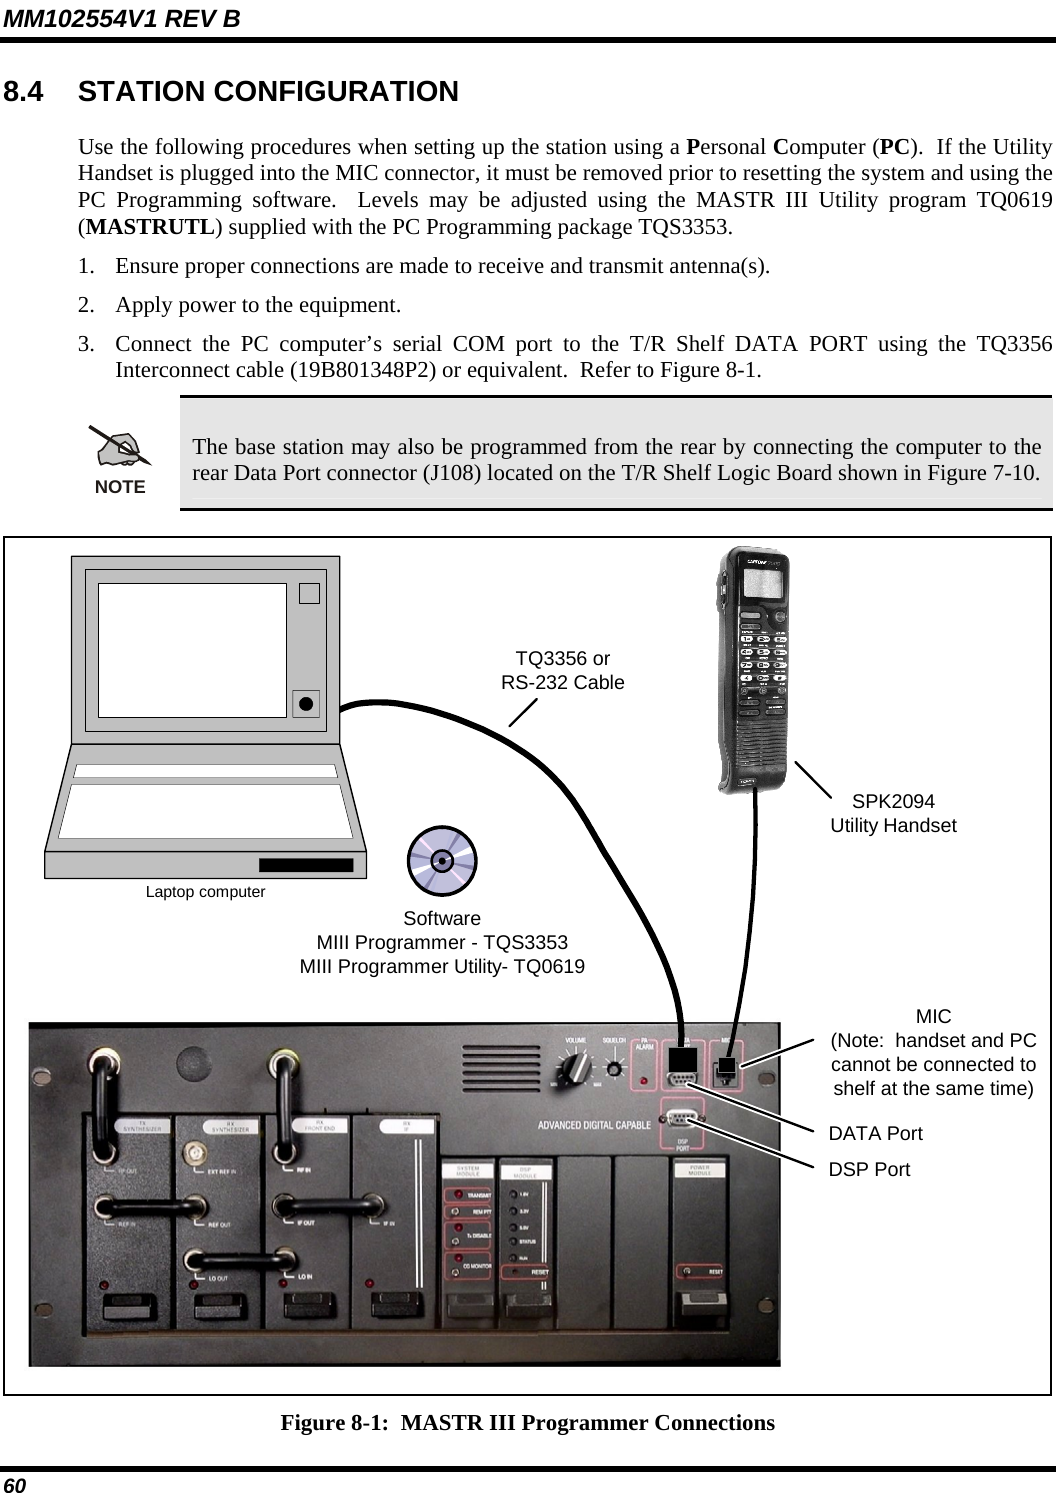 MM102554V1 REV B 60   8.4 STATION CONFIGURATION Use the following procedures when setting up the station using a Personal Computer (PC).  If the Utility Handset is plugged into the MIC connector, it must be removed prior to resetting the system and using the PC Programming software.  Levels may be adjusted using the MASTR III Utility program TQ0619 (MASTRUTL) supplied with the PC Programming package TQS3353.   1. Ensure proper connections are made to receive and transmit antenna(s).  2. Apply power to the equipment. 3. Connect the PC computer’s serial COM port to the T/R Shelf DATA PORT using the TQ3356 Interconnect cable (19B801348P2) or equivalent.  Refer to Figure 8-1. NOTE The base station may also be programmed from the rear by connecting the computer to the rear Data Port connector (J108) located on the T/R Shelf Logic Board shown in Figure 7-10.  TQ3356 orRS-232 CableSPK2094Utility HandsetMIC(Note:  handset and PCcannot be connected toshelf at the same time)DATA PortDSP PortLaptop computerSoftwareMIII Programmer - TQS3353MIII Programmer Utility- TQ0619 Figure 8-1:  MASTR III Programmer Connections 